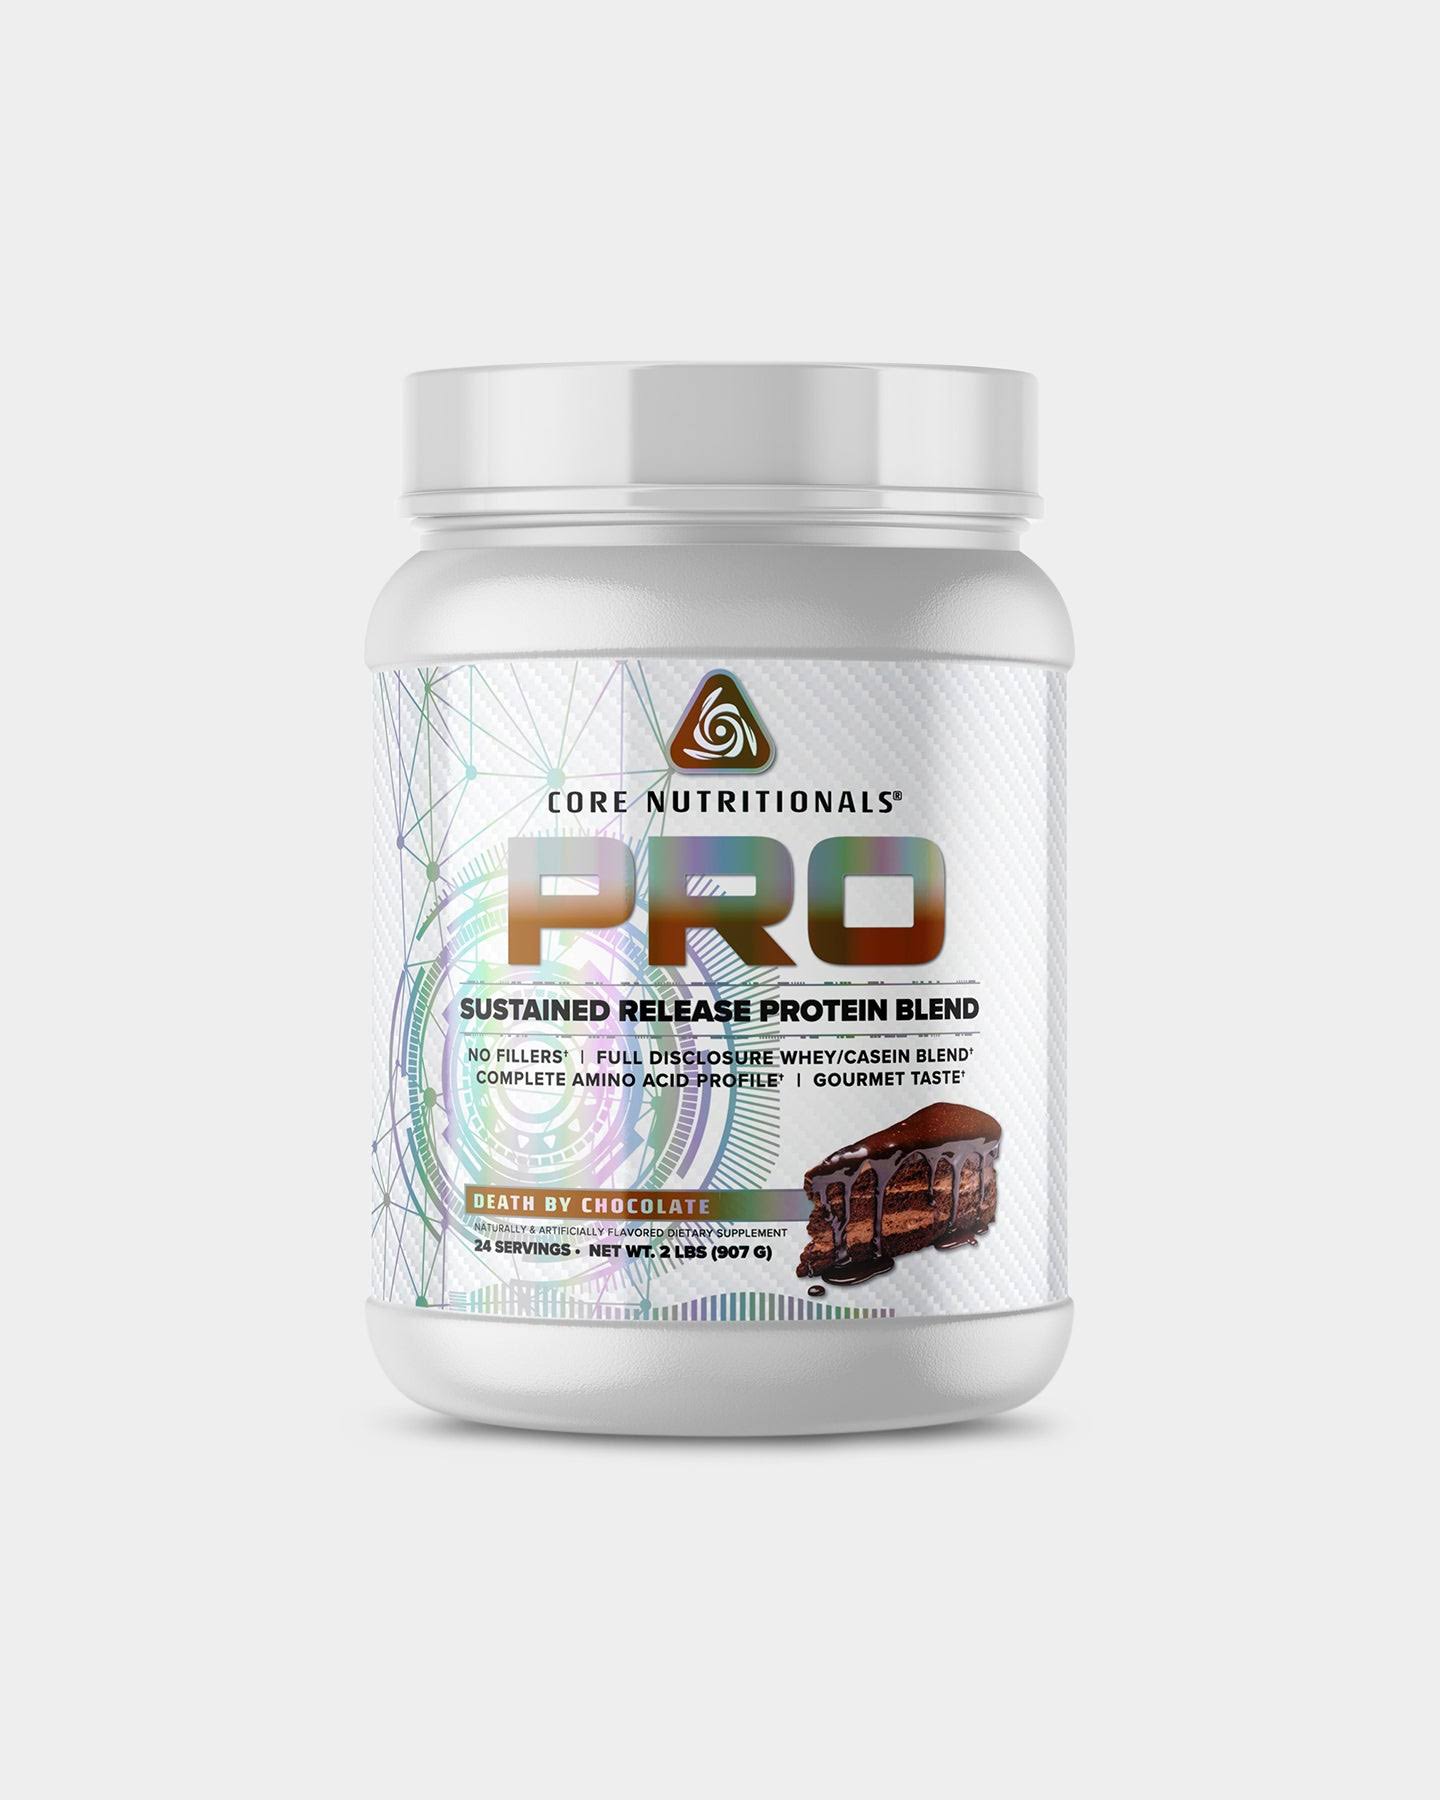 Core Nutritionals Pro 25, 907g / Death by Chocolate